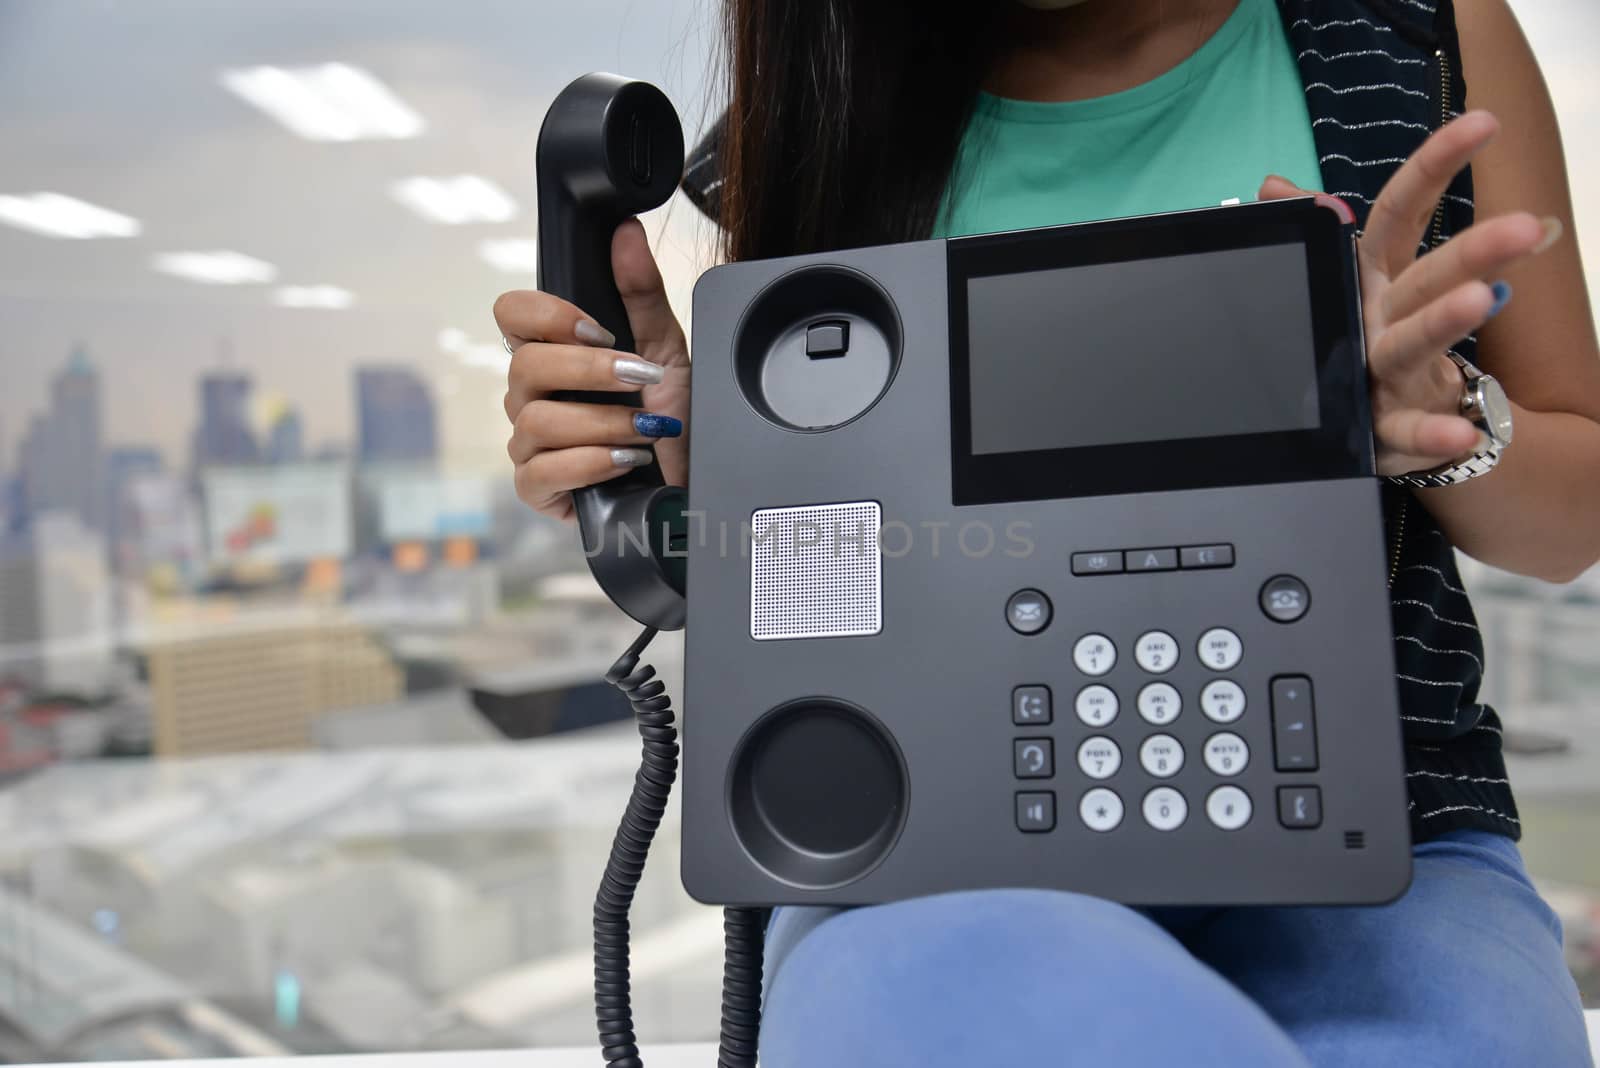 IP Phone - technology of voice